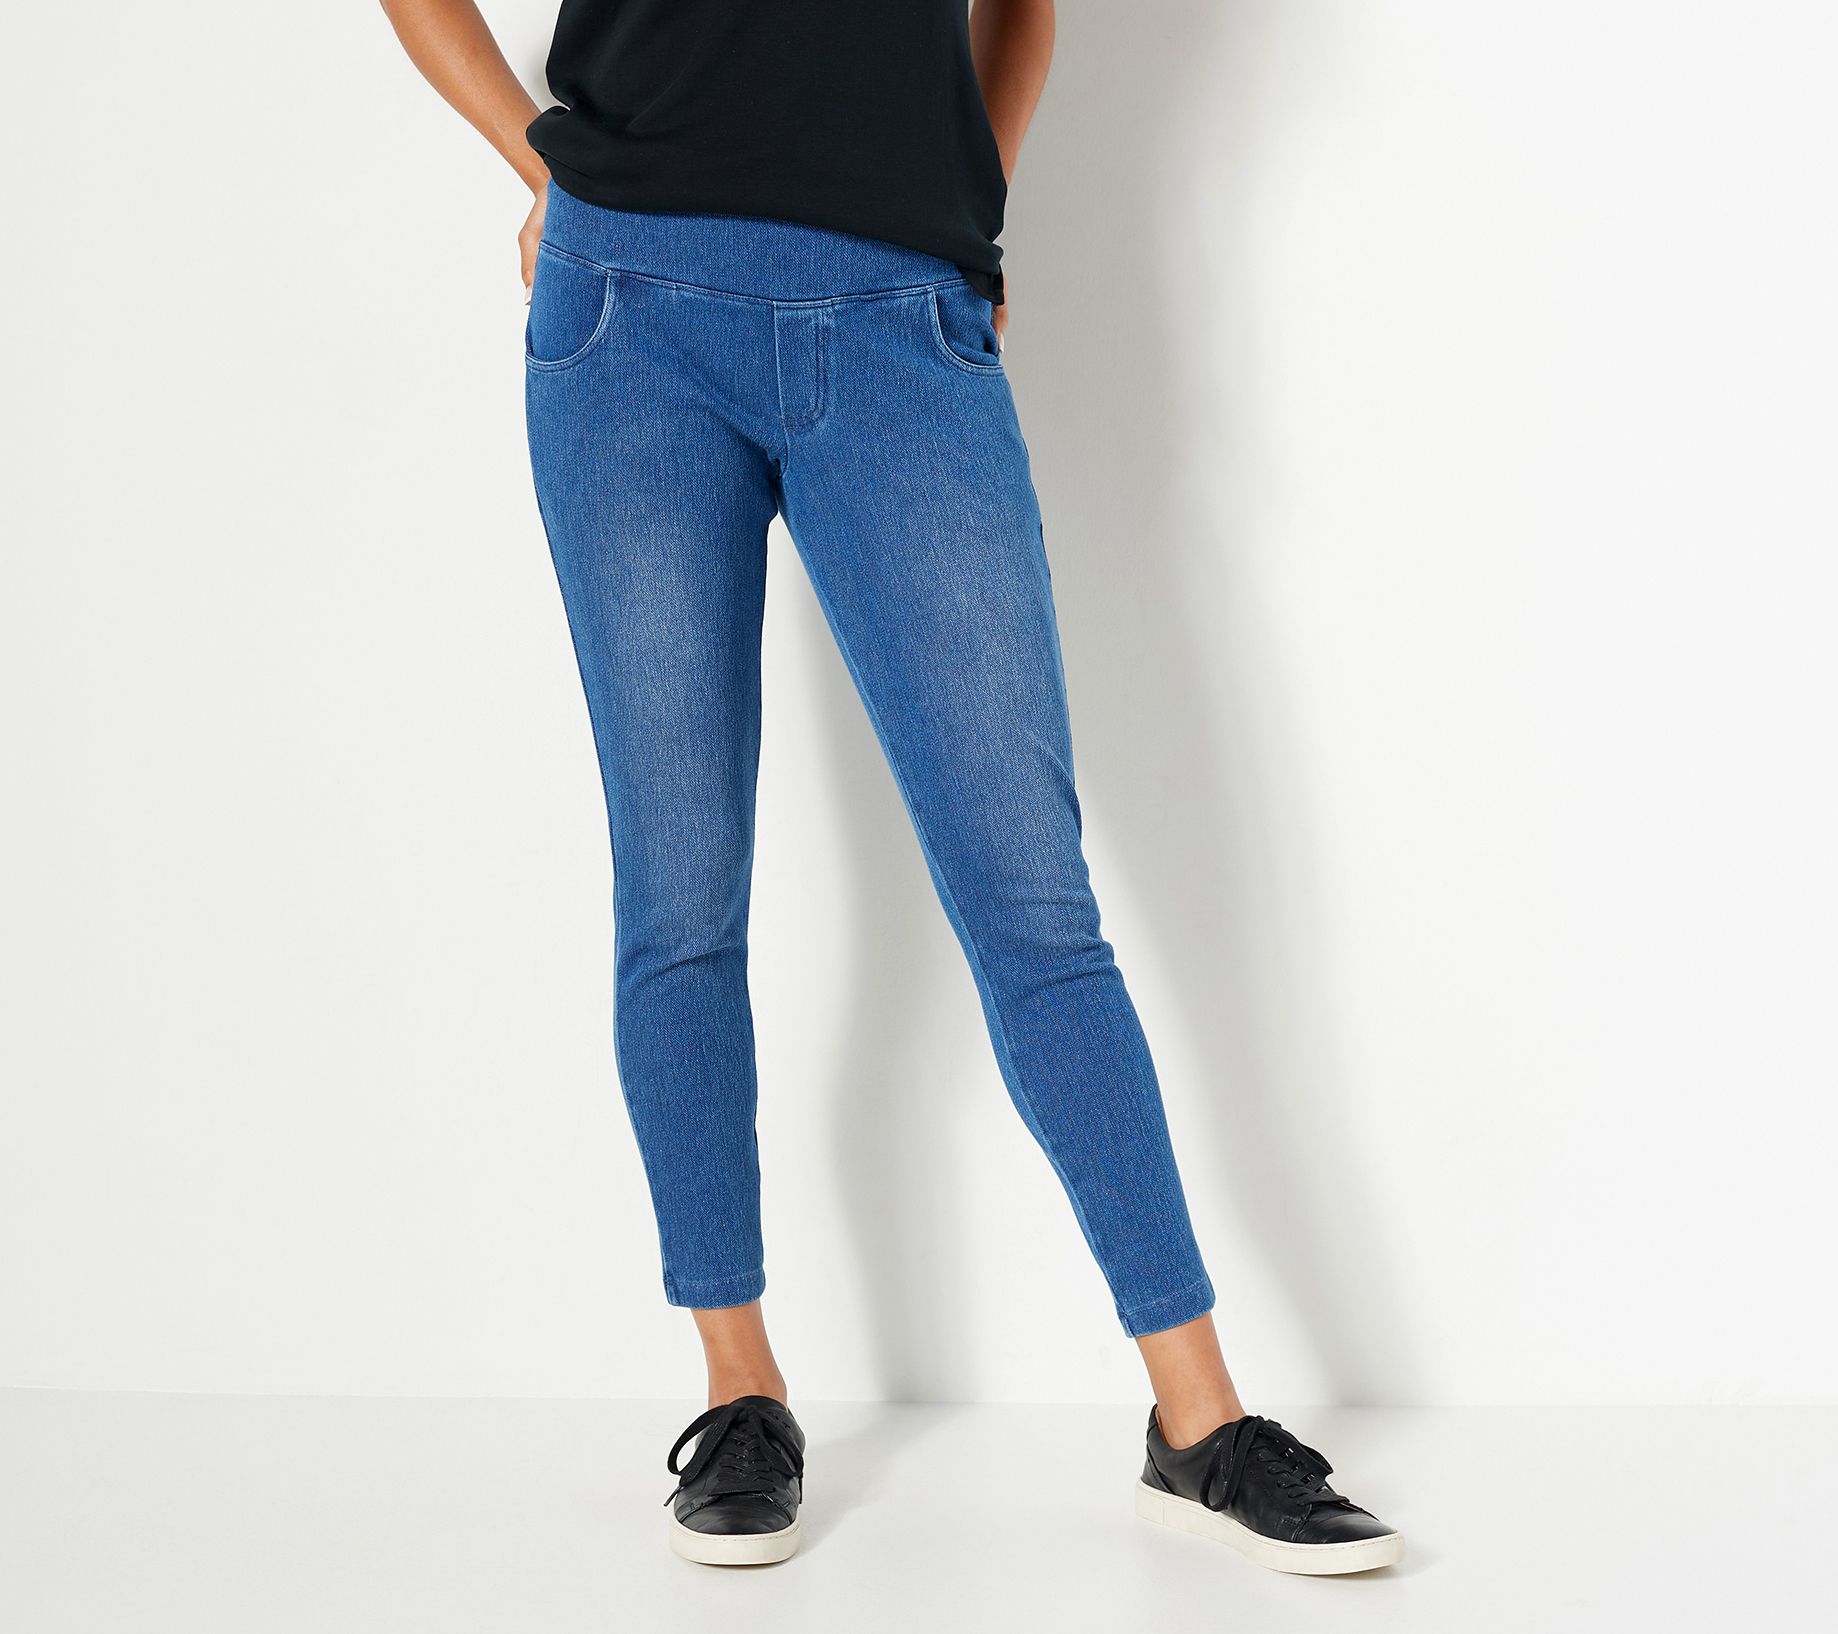 Women with Control Petite Prime Stretch Denim Leggings with Pockets 